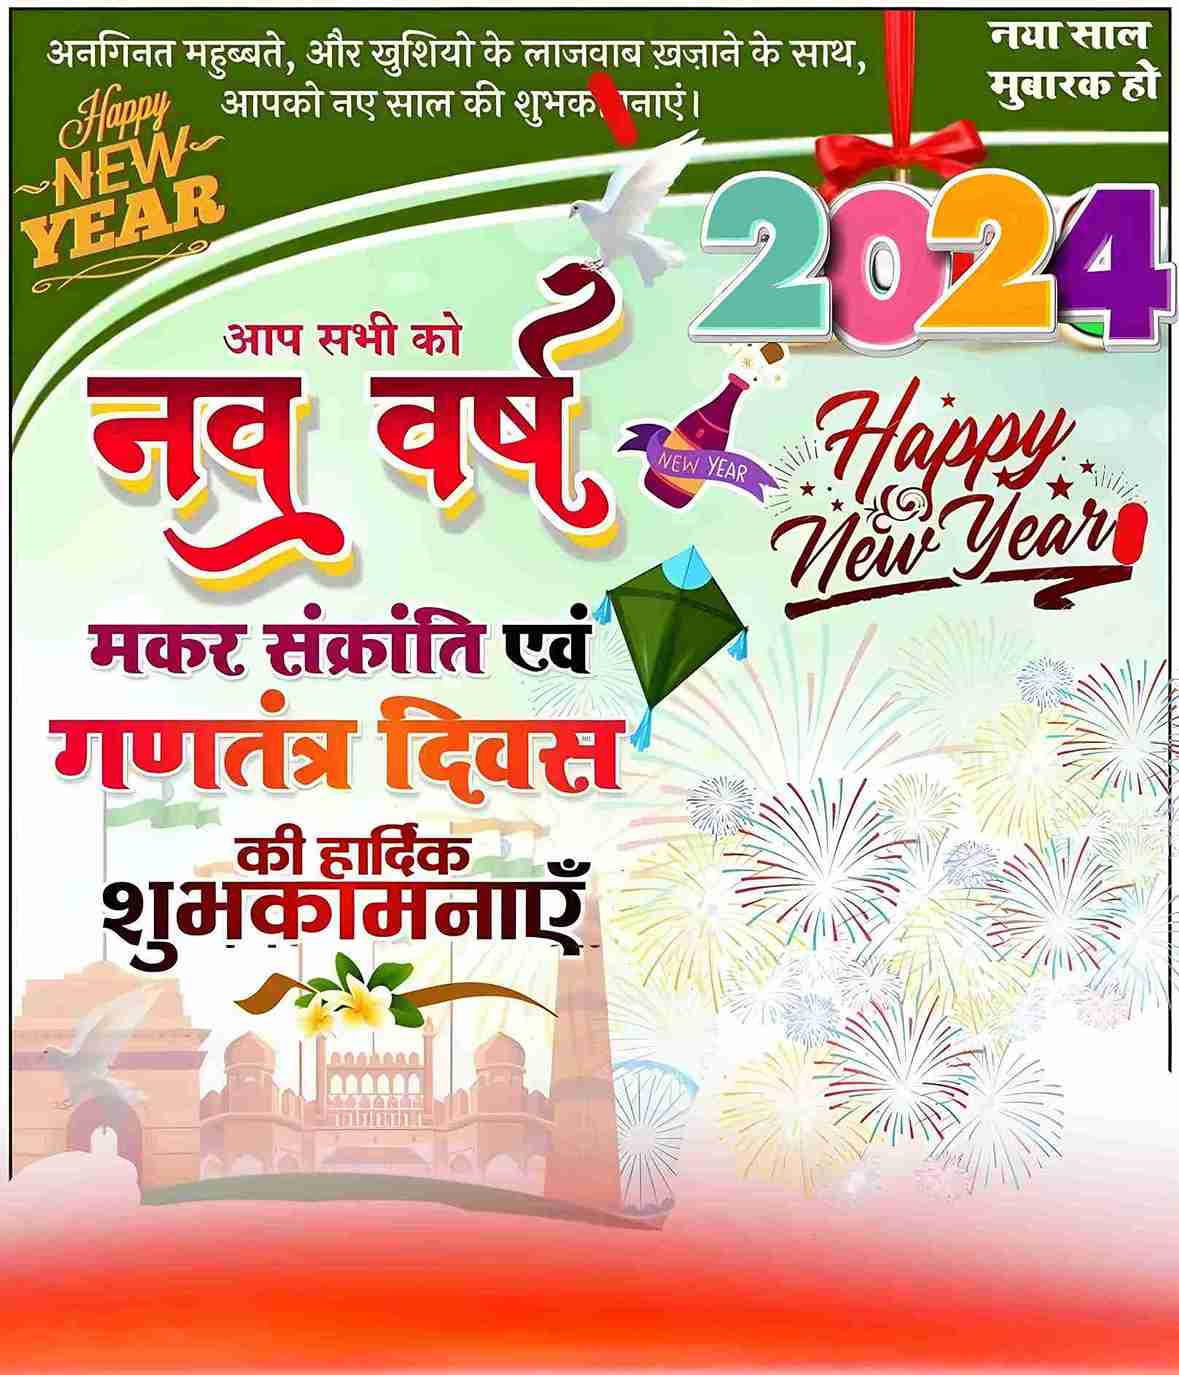 Happy New Year 2024 Poster in Hindi